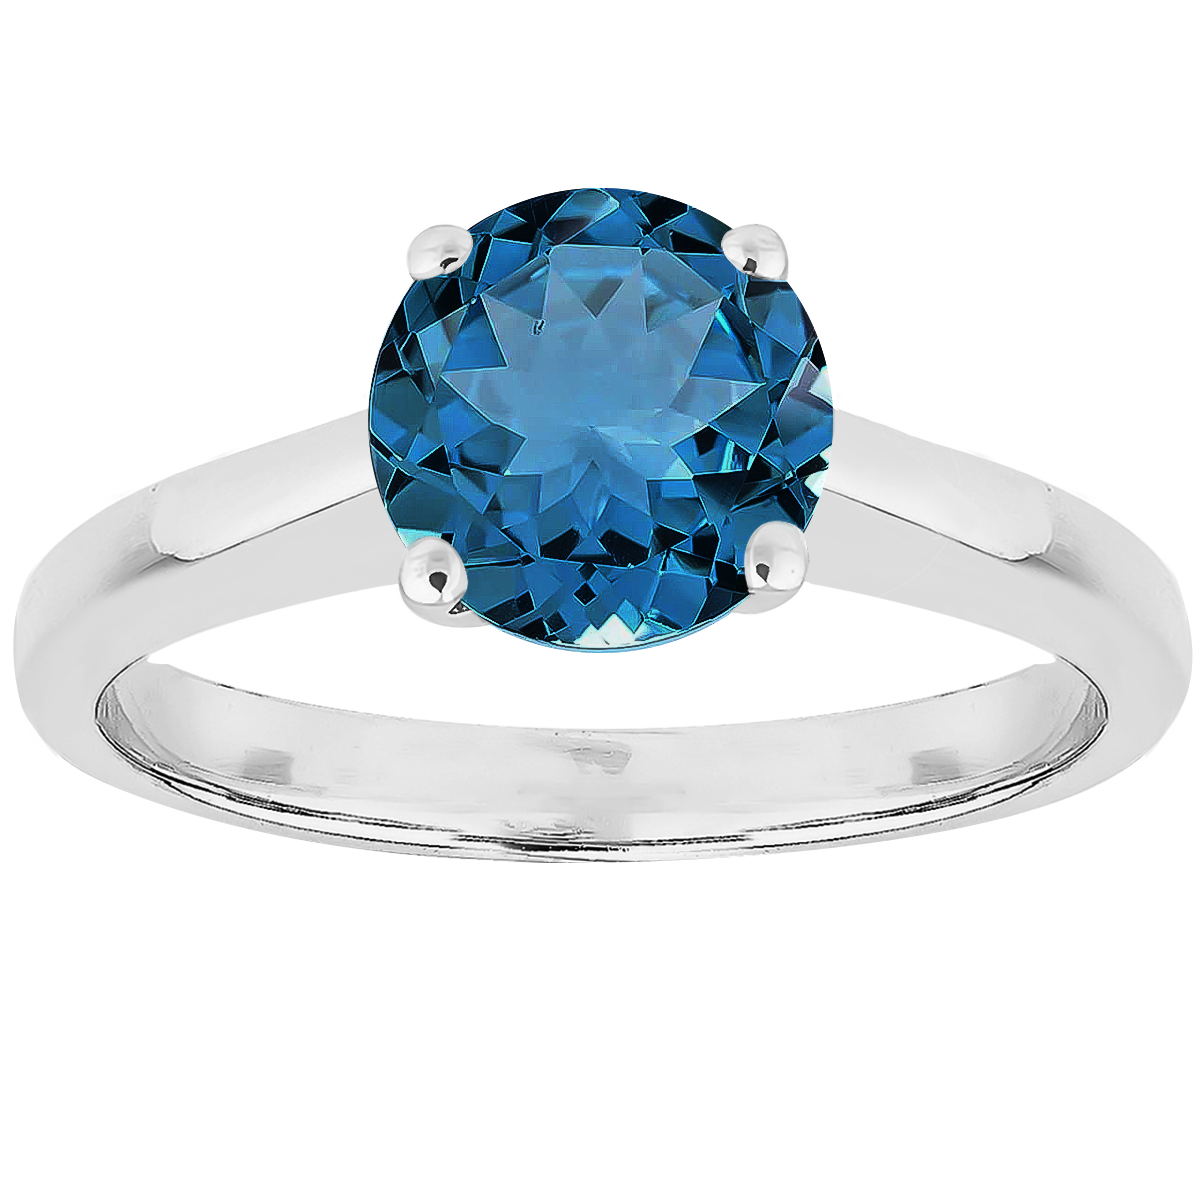 0.84ct London Blue Topaz Solitaire Engagement Ring in 9ct White Gold.